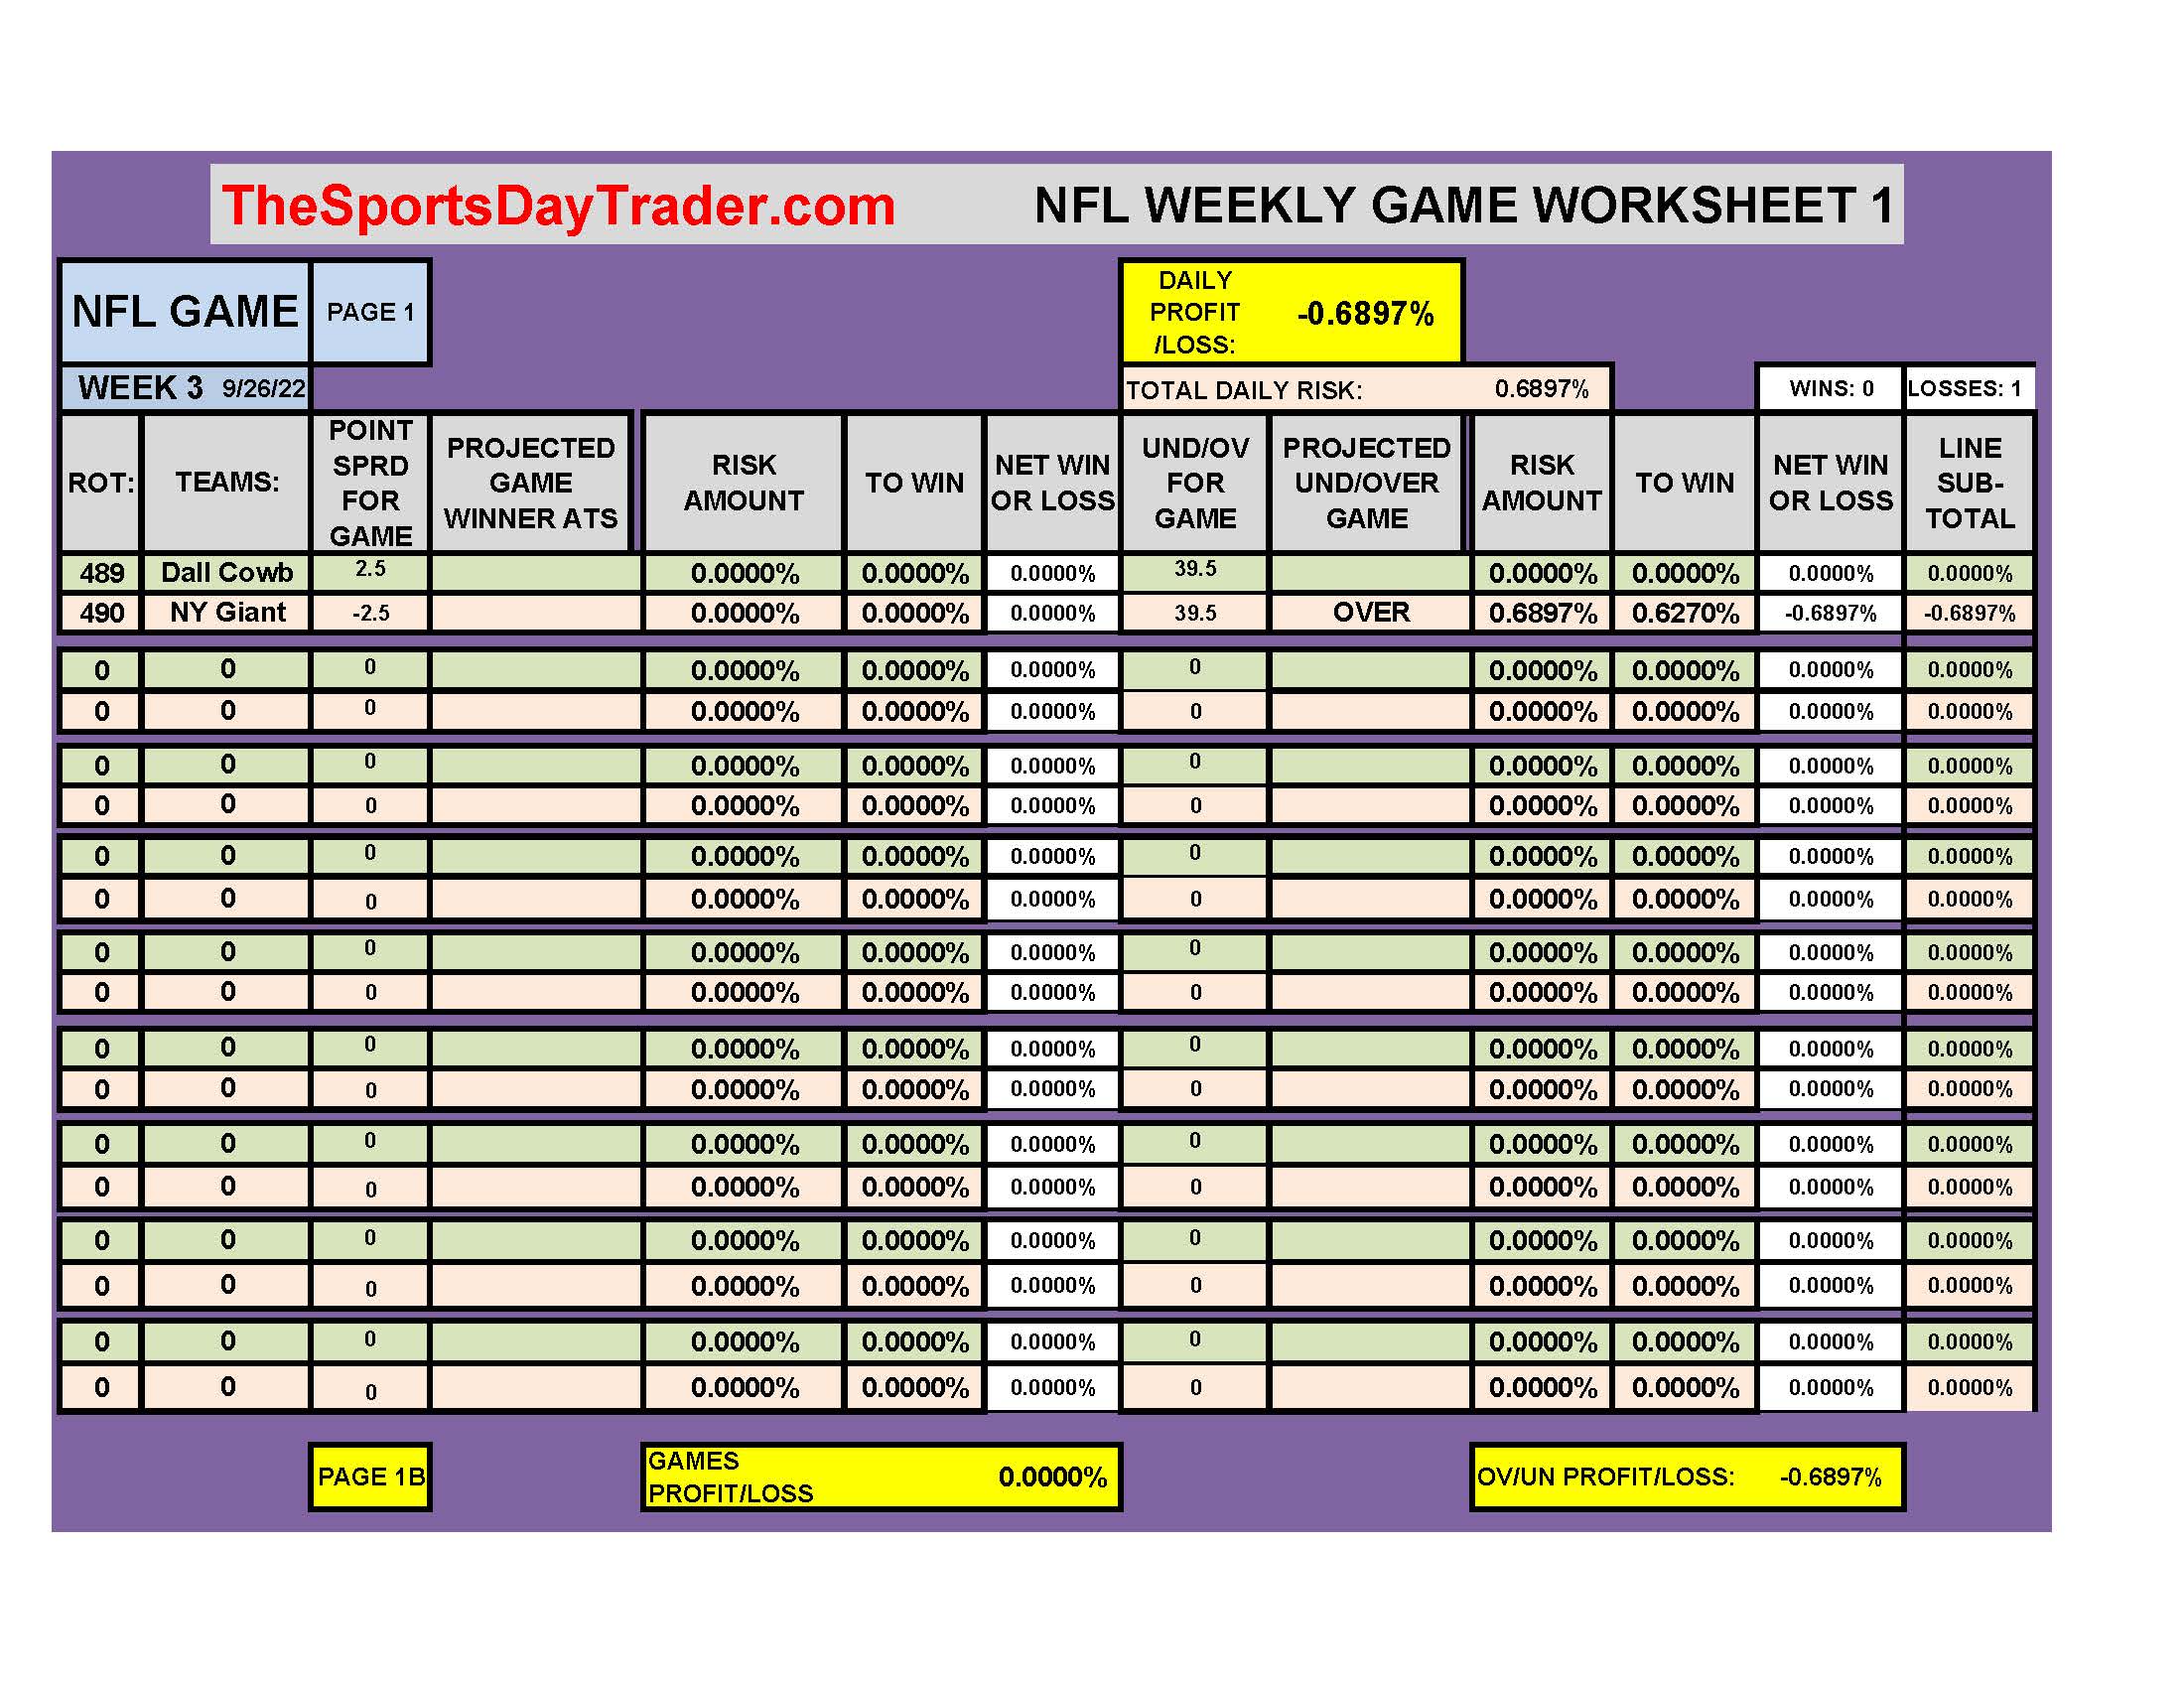 NFL 9/26/22 GAME DAILY RESULTS